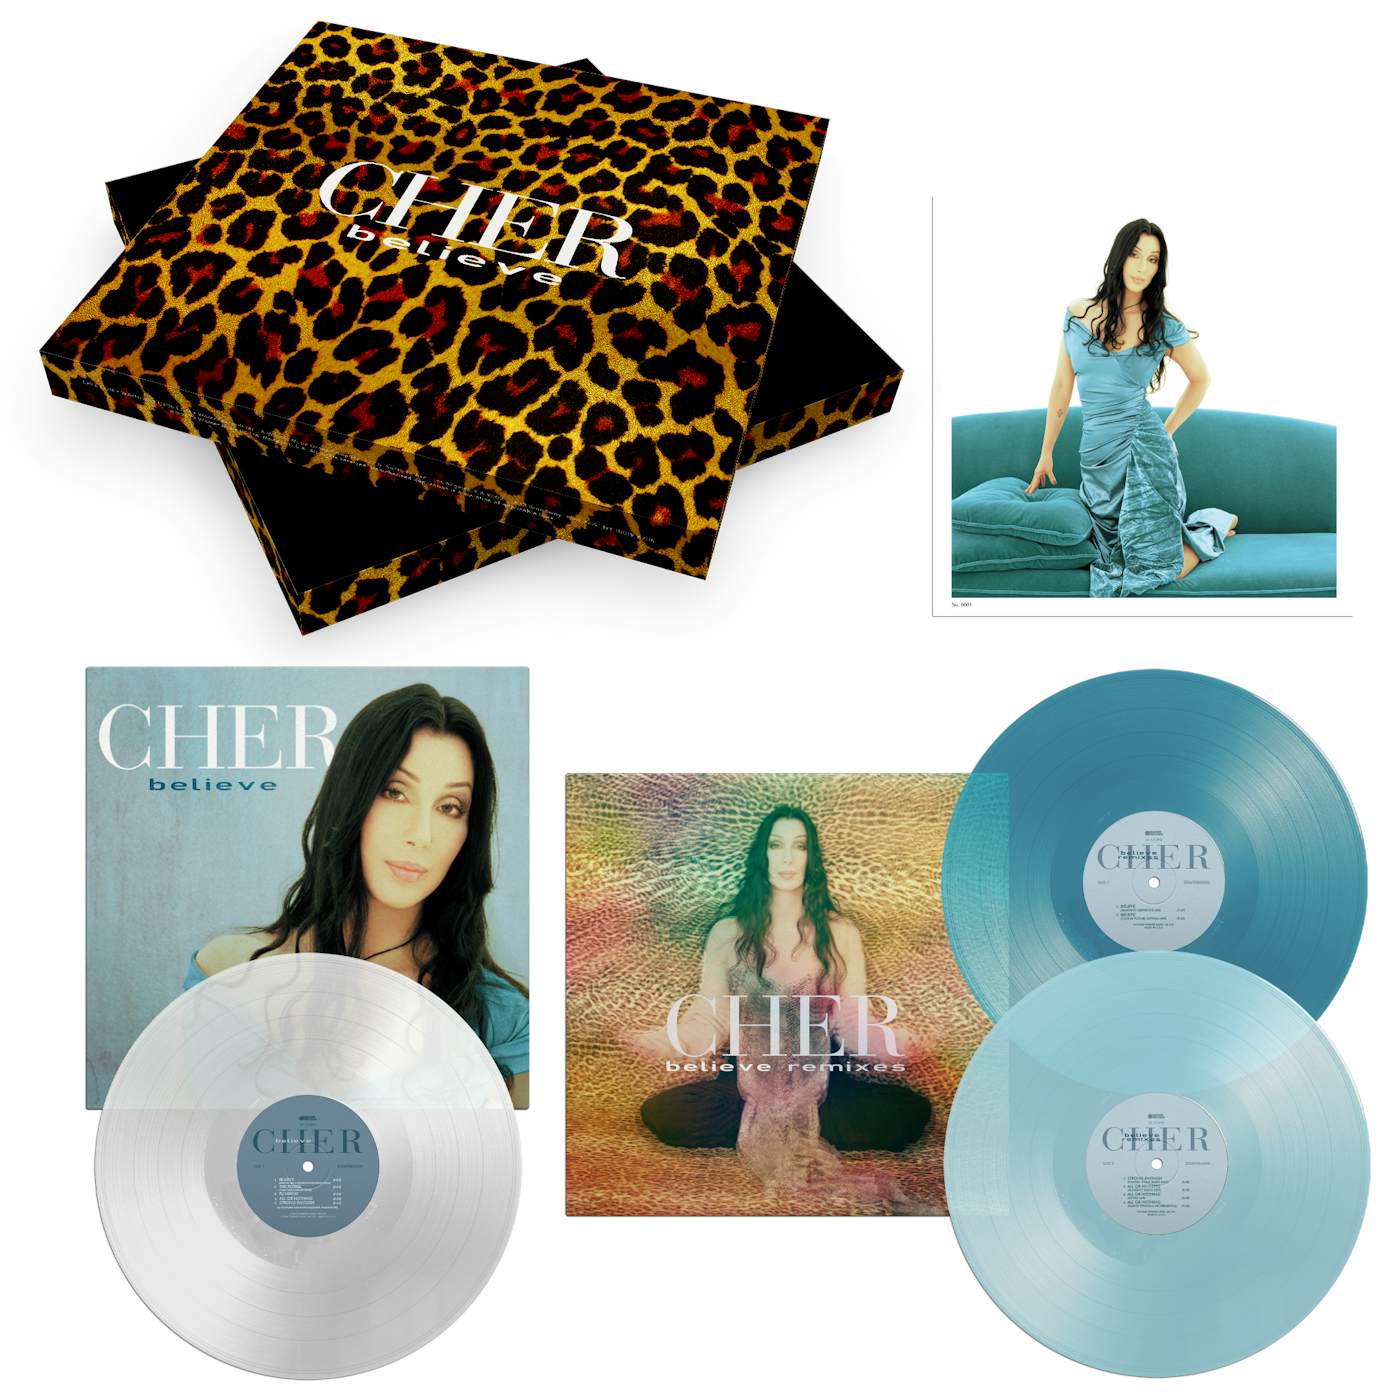 Cher Believe (25th Anniversary Deluxe Edition) (Colored 3LP) (Vinyl)